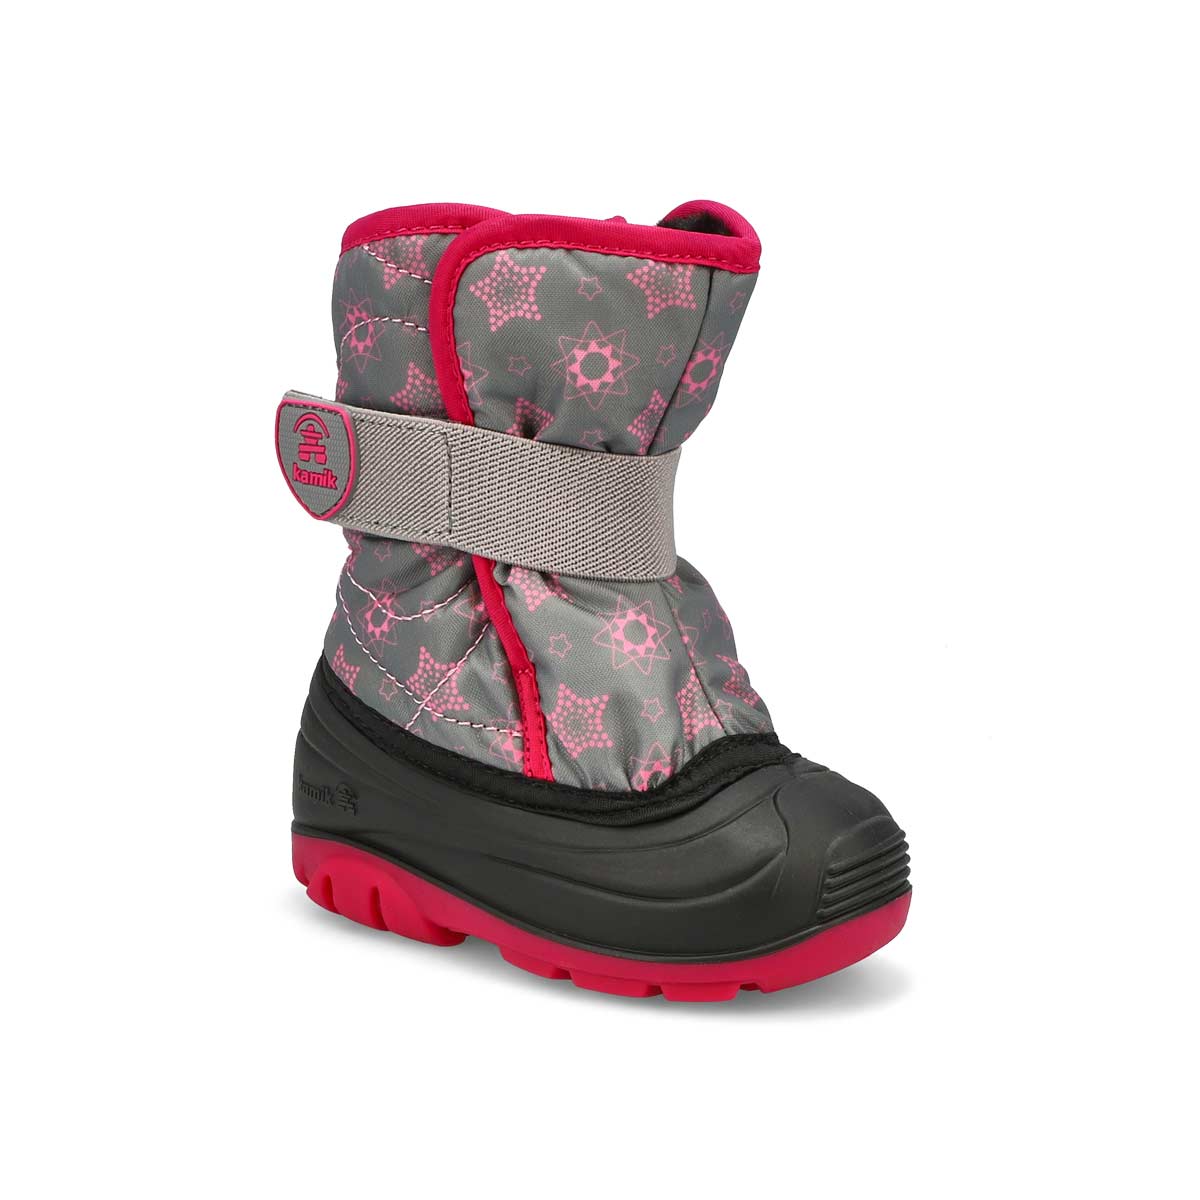 Inf-g Snowbug 4 Waterproof Winter Boot-Gry/Fchs